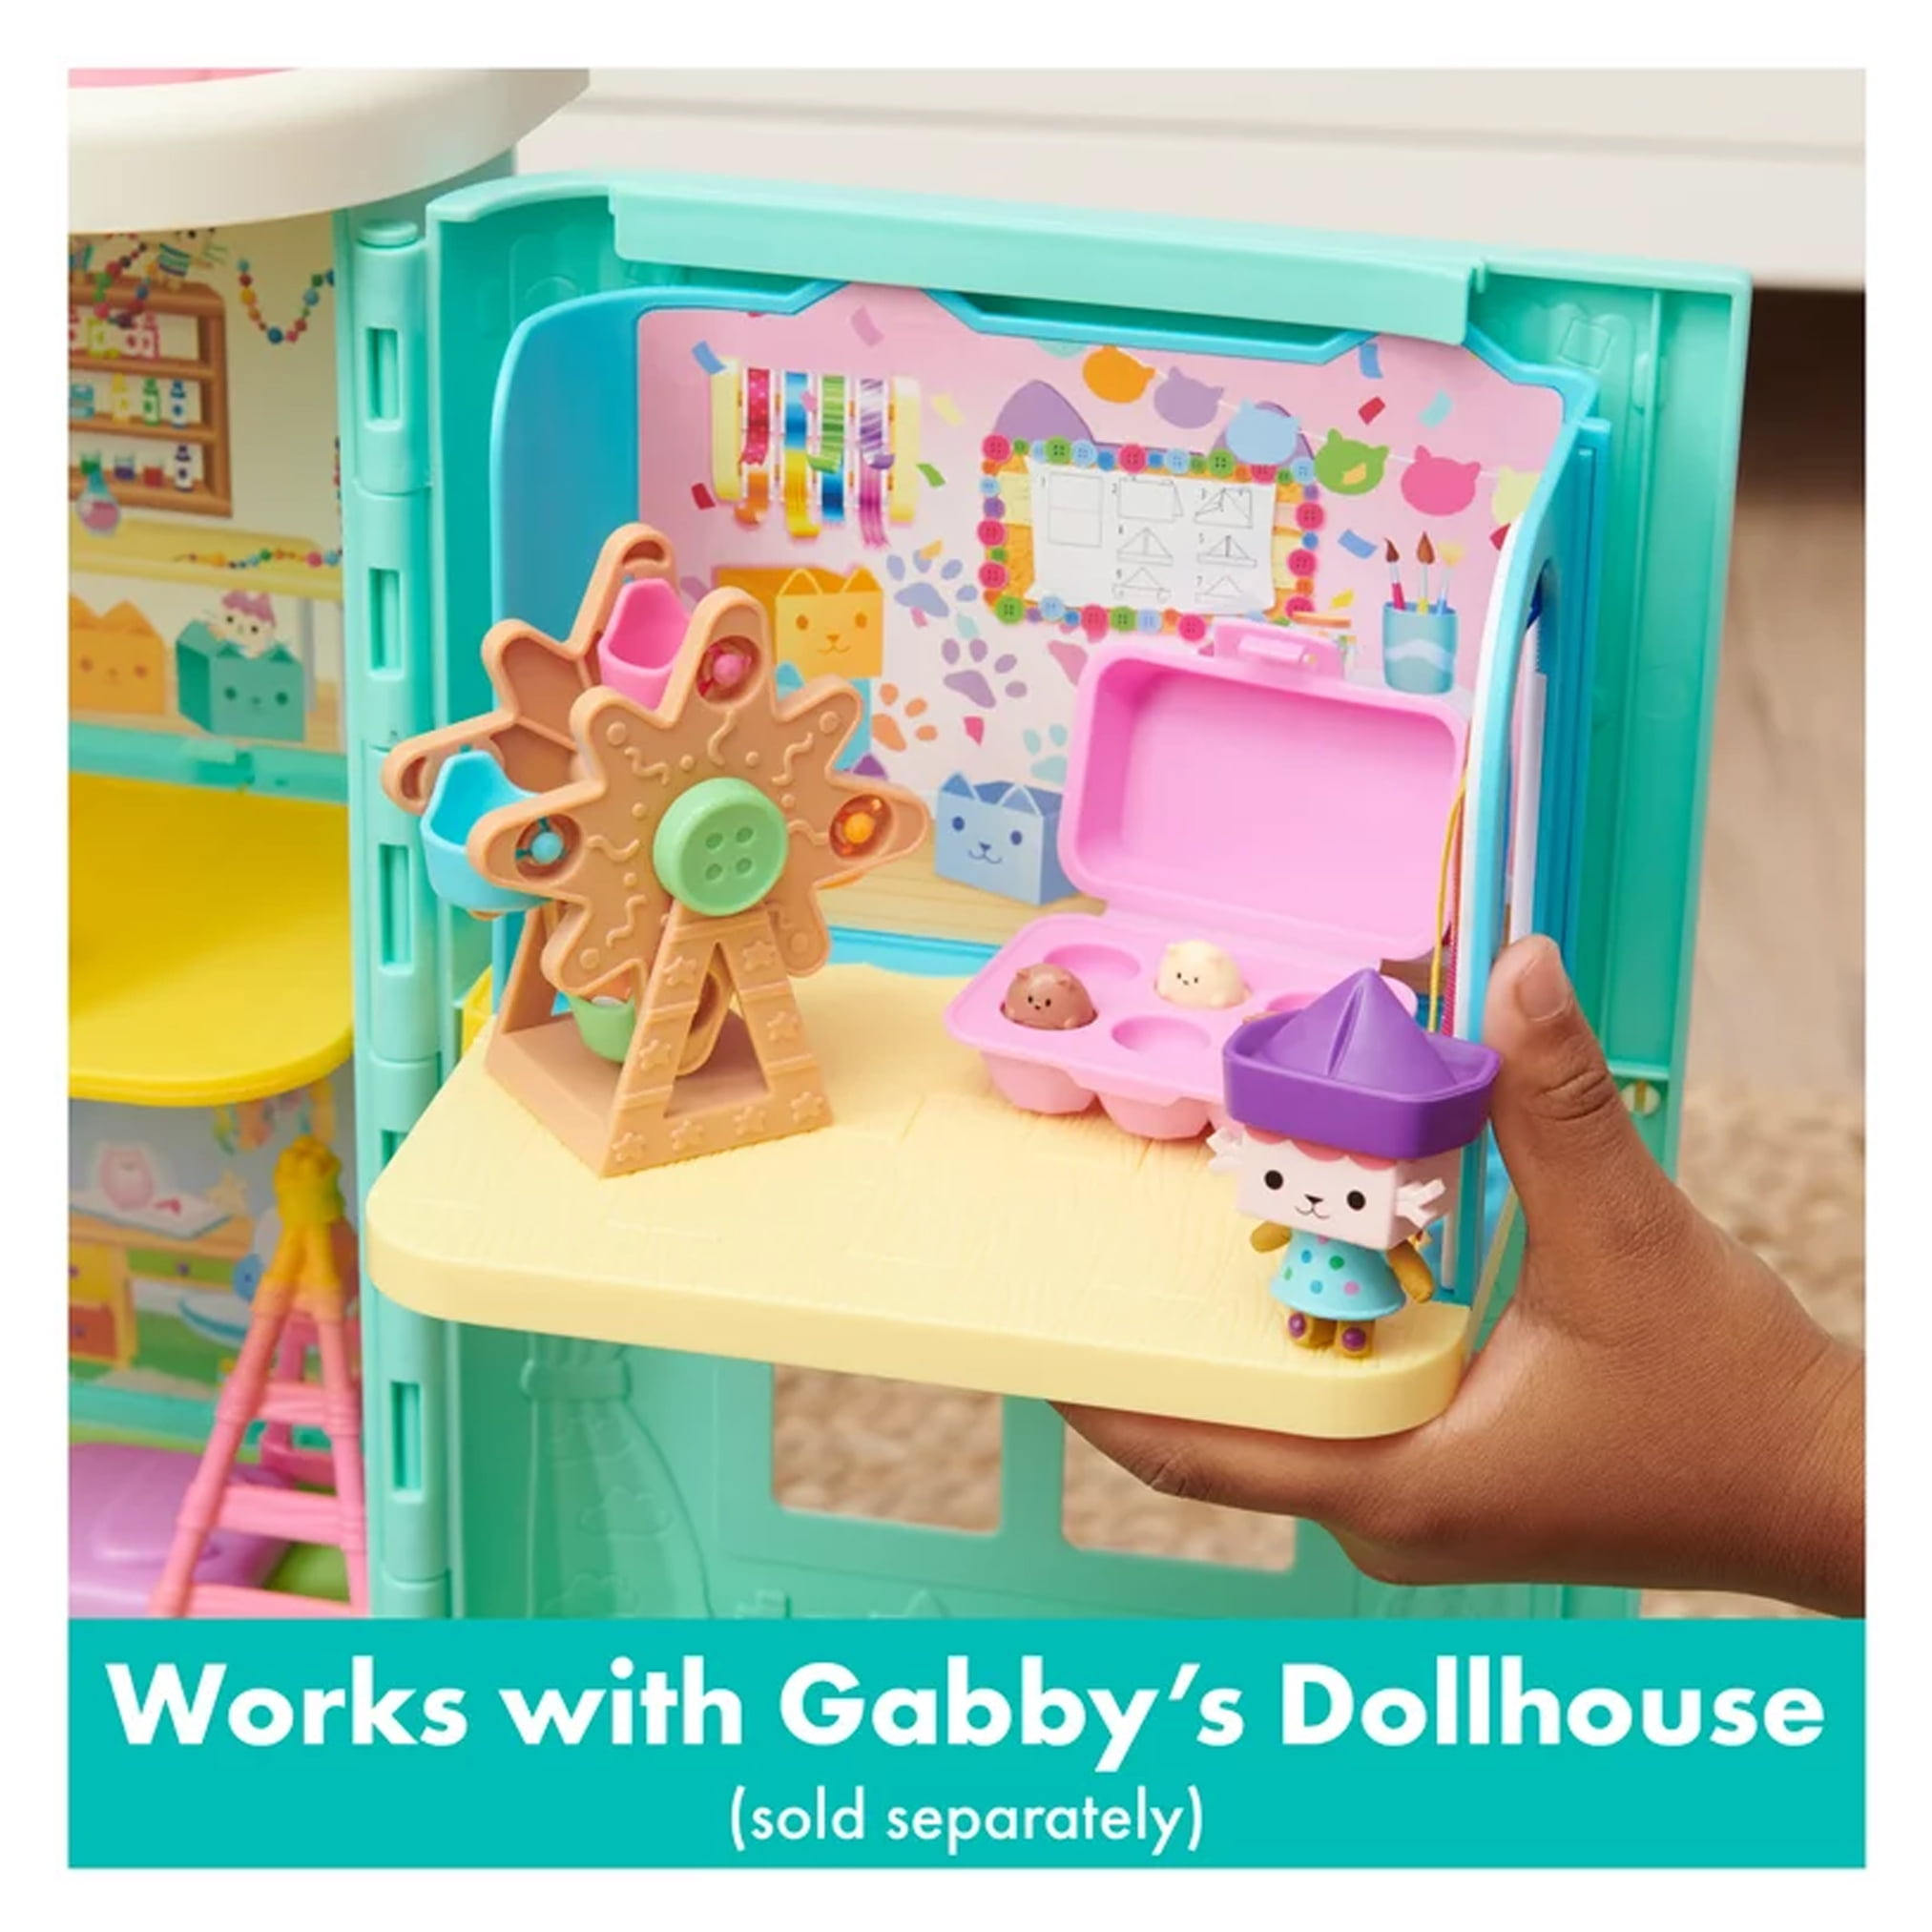 Gabby's Dollhouse, Baby Box Cat Craft-A-Riffic Room with Exclusive Figure,  Accessories, Furniture and Dollhouse Delivery, Kids Toys for Ages 3 and up